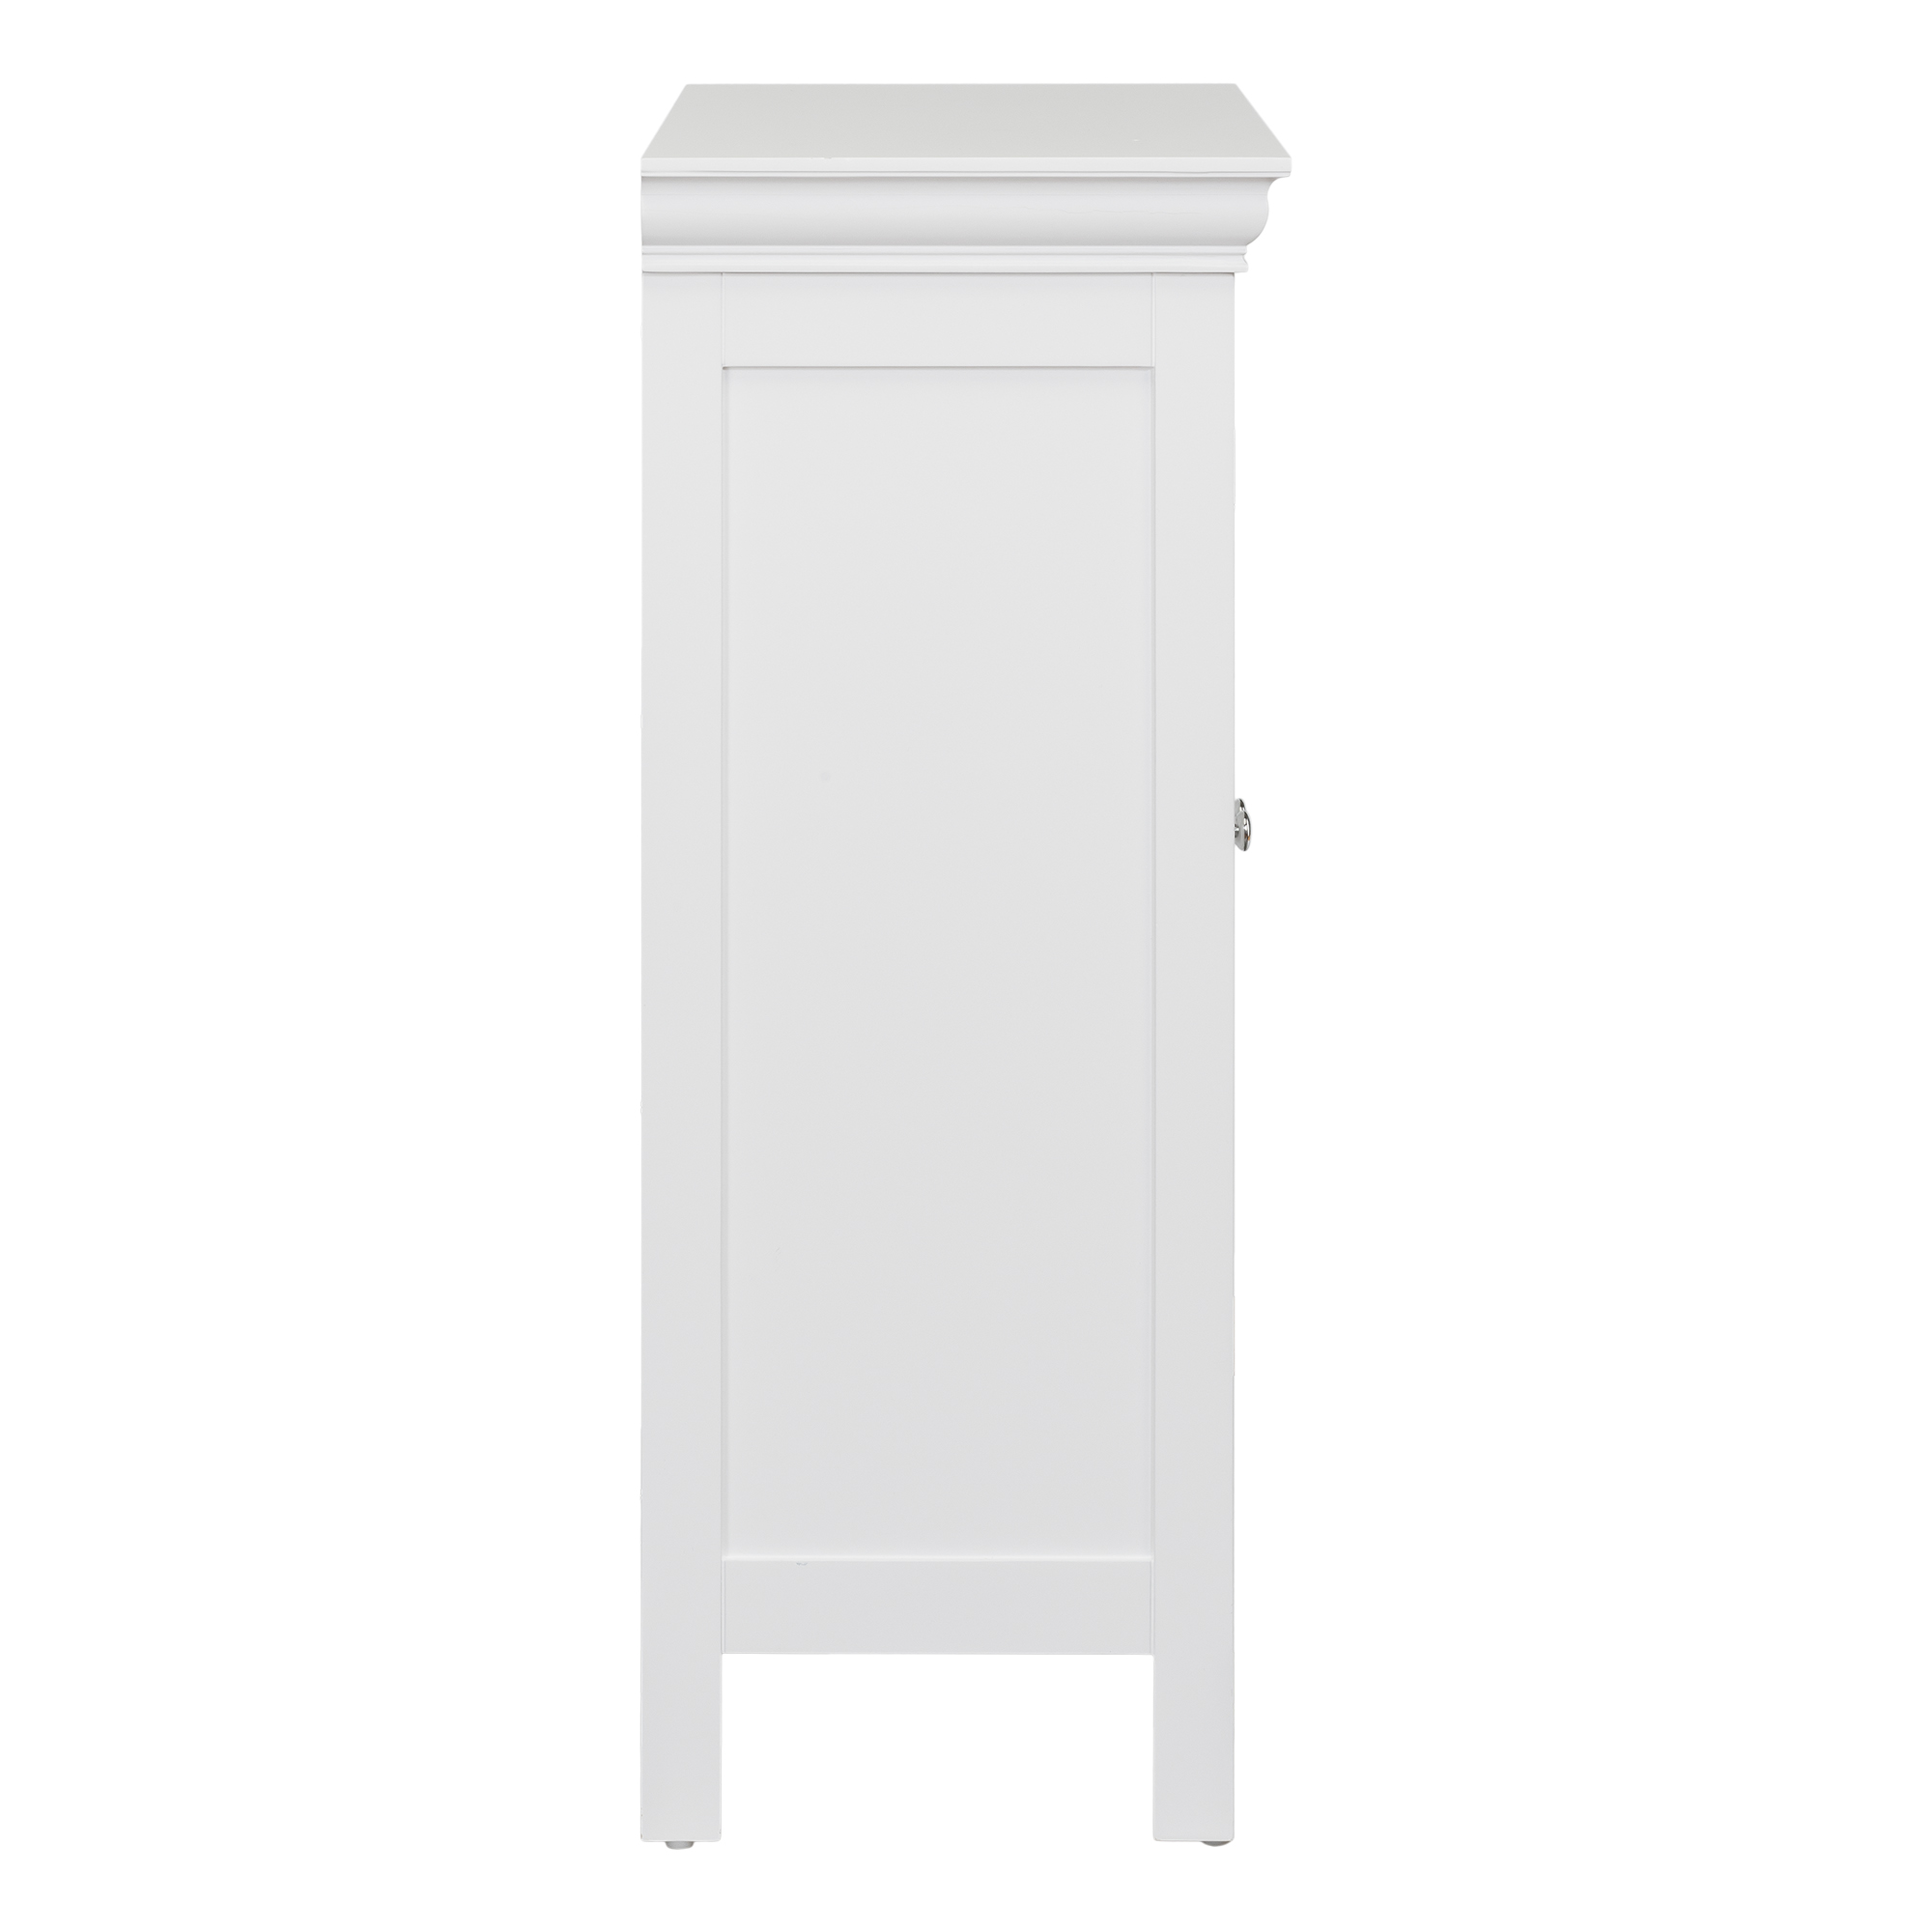 Teamson Home Stratford Wooden Space Saver with Shutter Doors, White